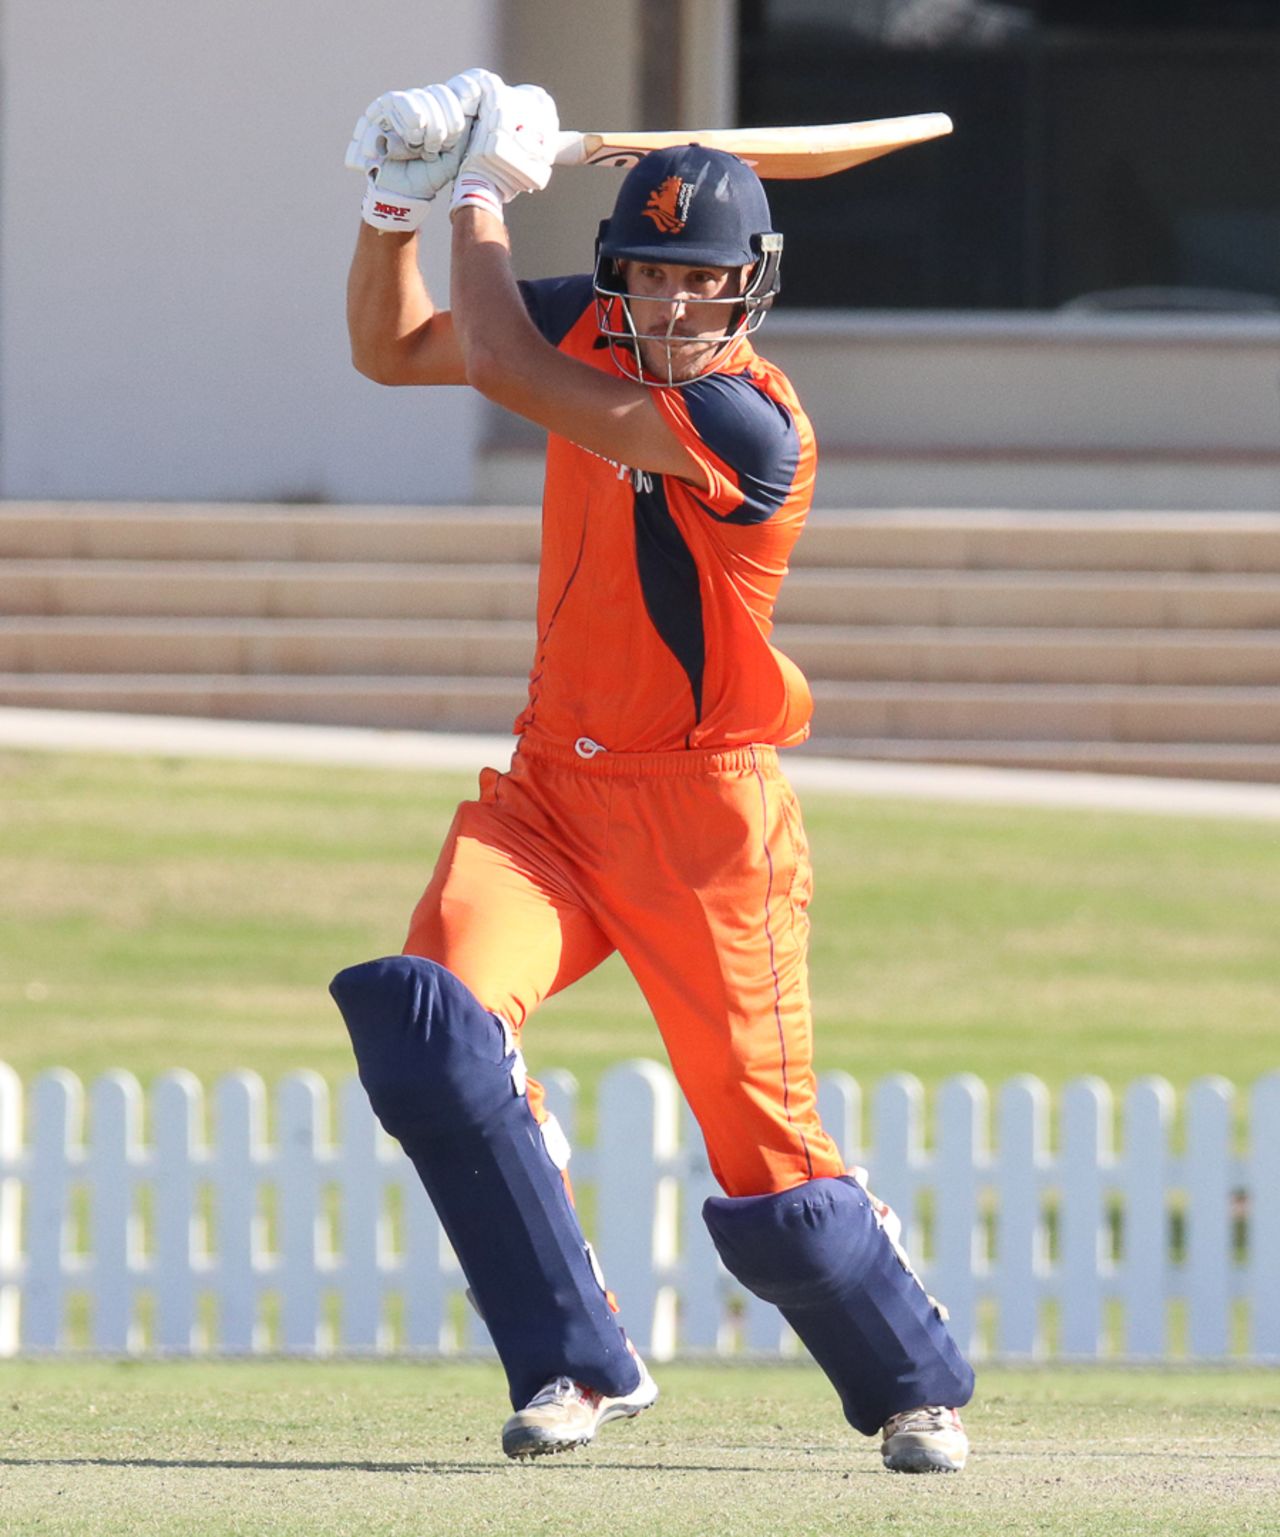 Ben Cooper drives down the ground past mid-off for another boundary , Namibia v Netherlands, 2015-17 WCL Championship, Dubai, December 6, 2017